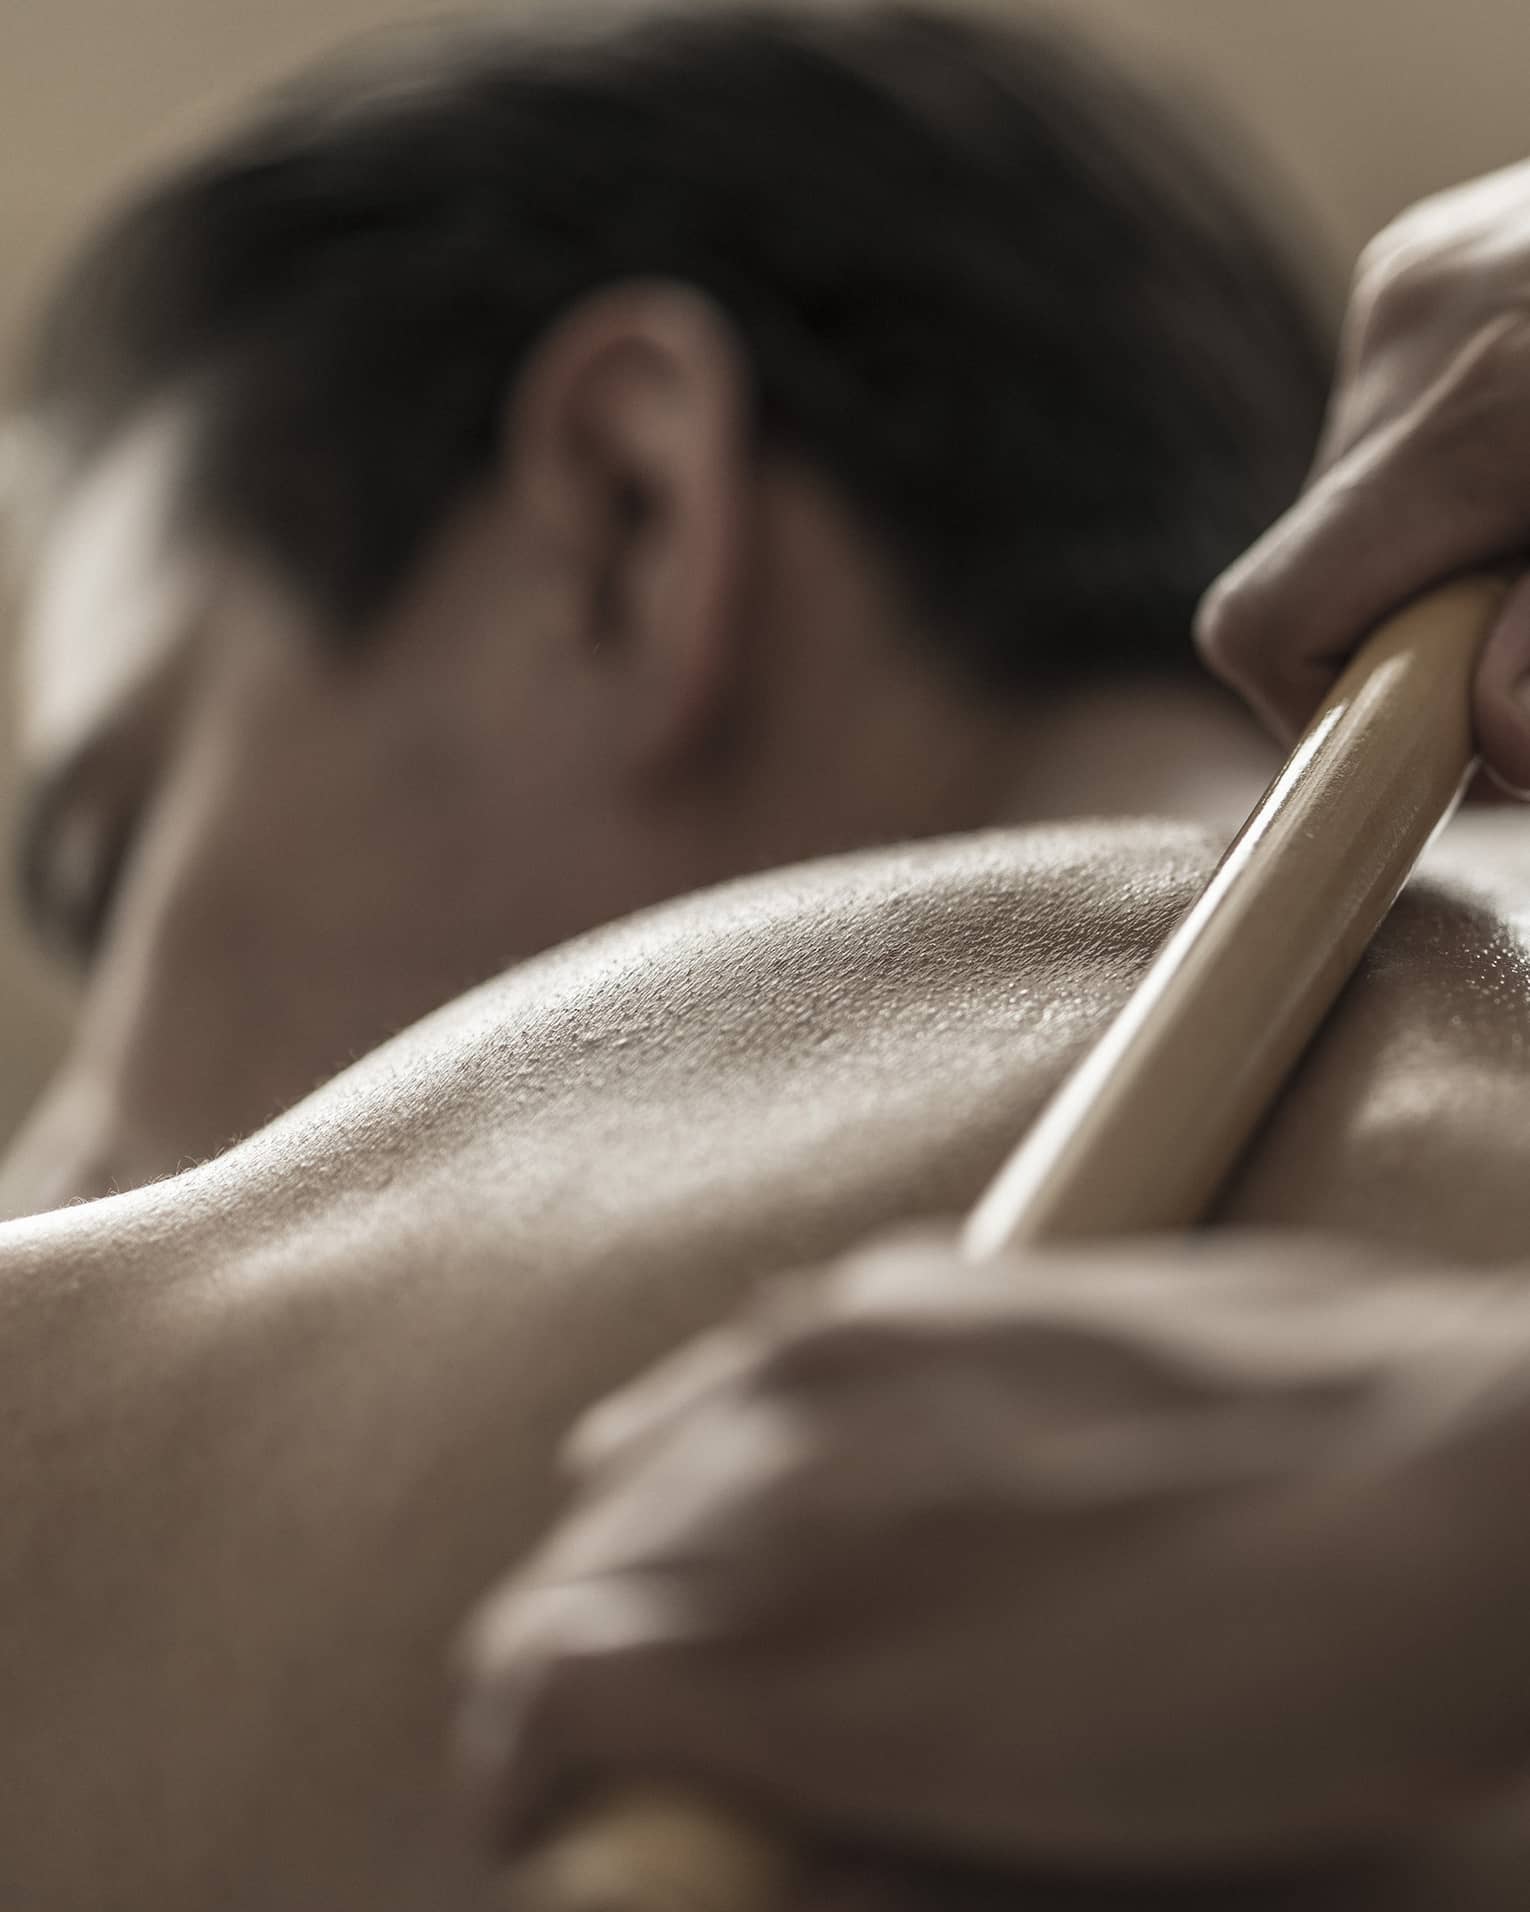 A spa attendant uses a tool to massage a guest's back